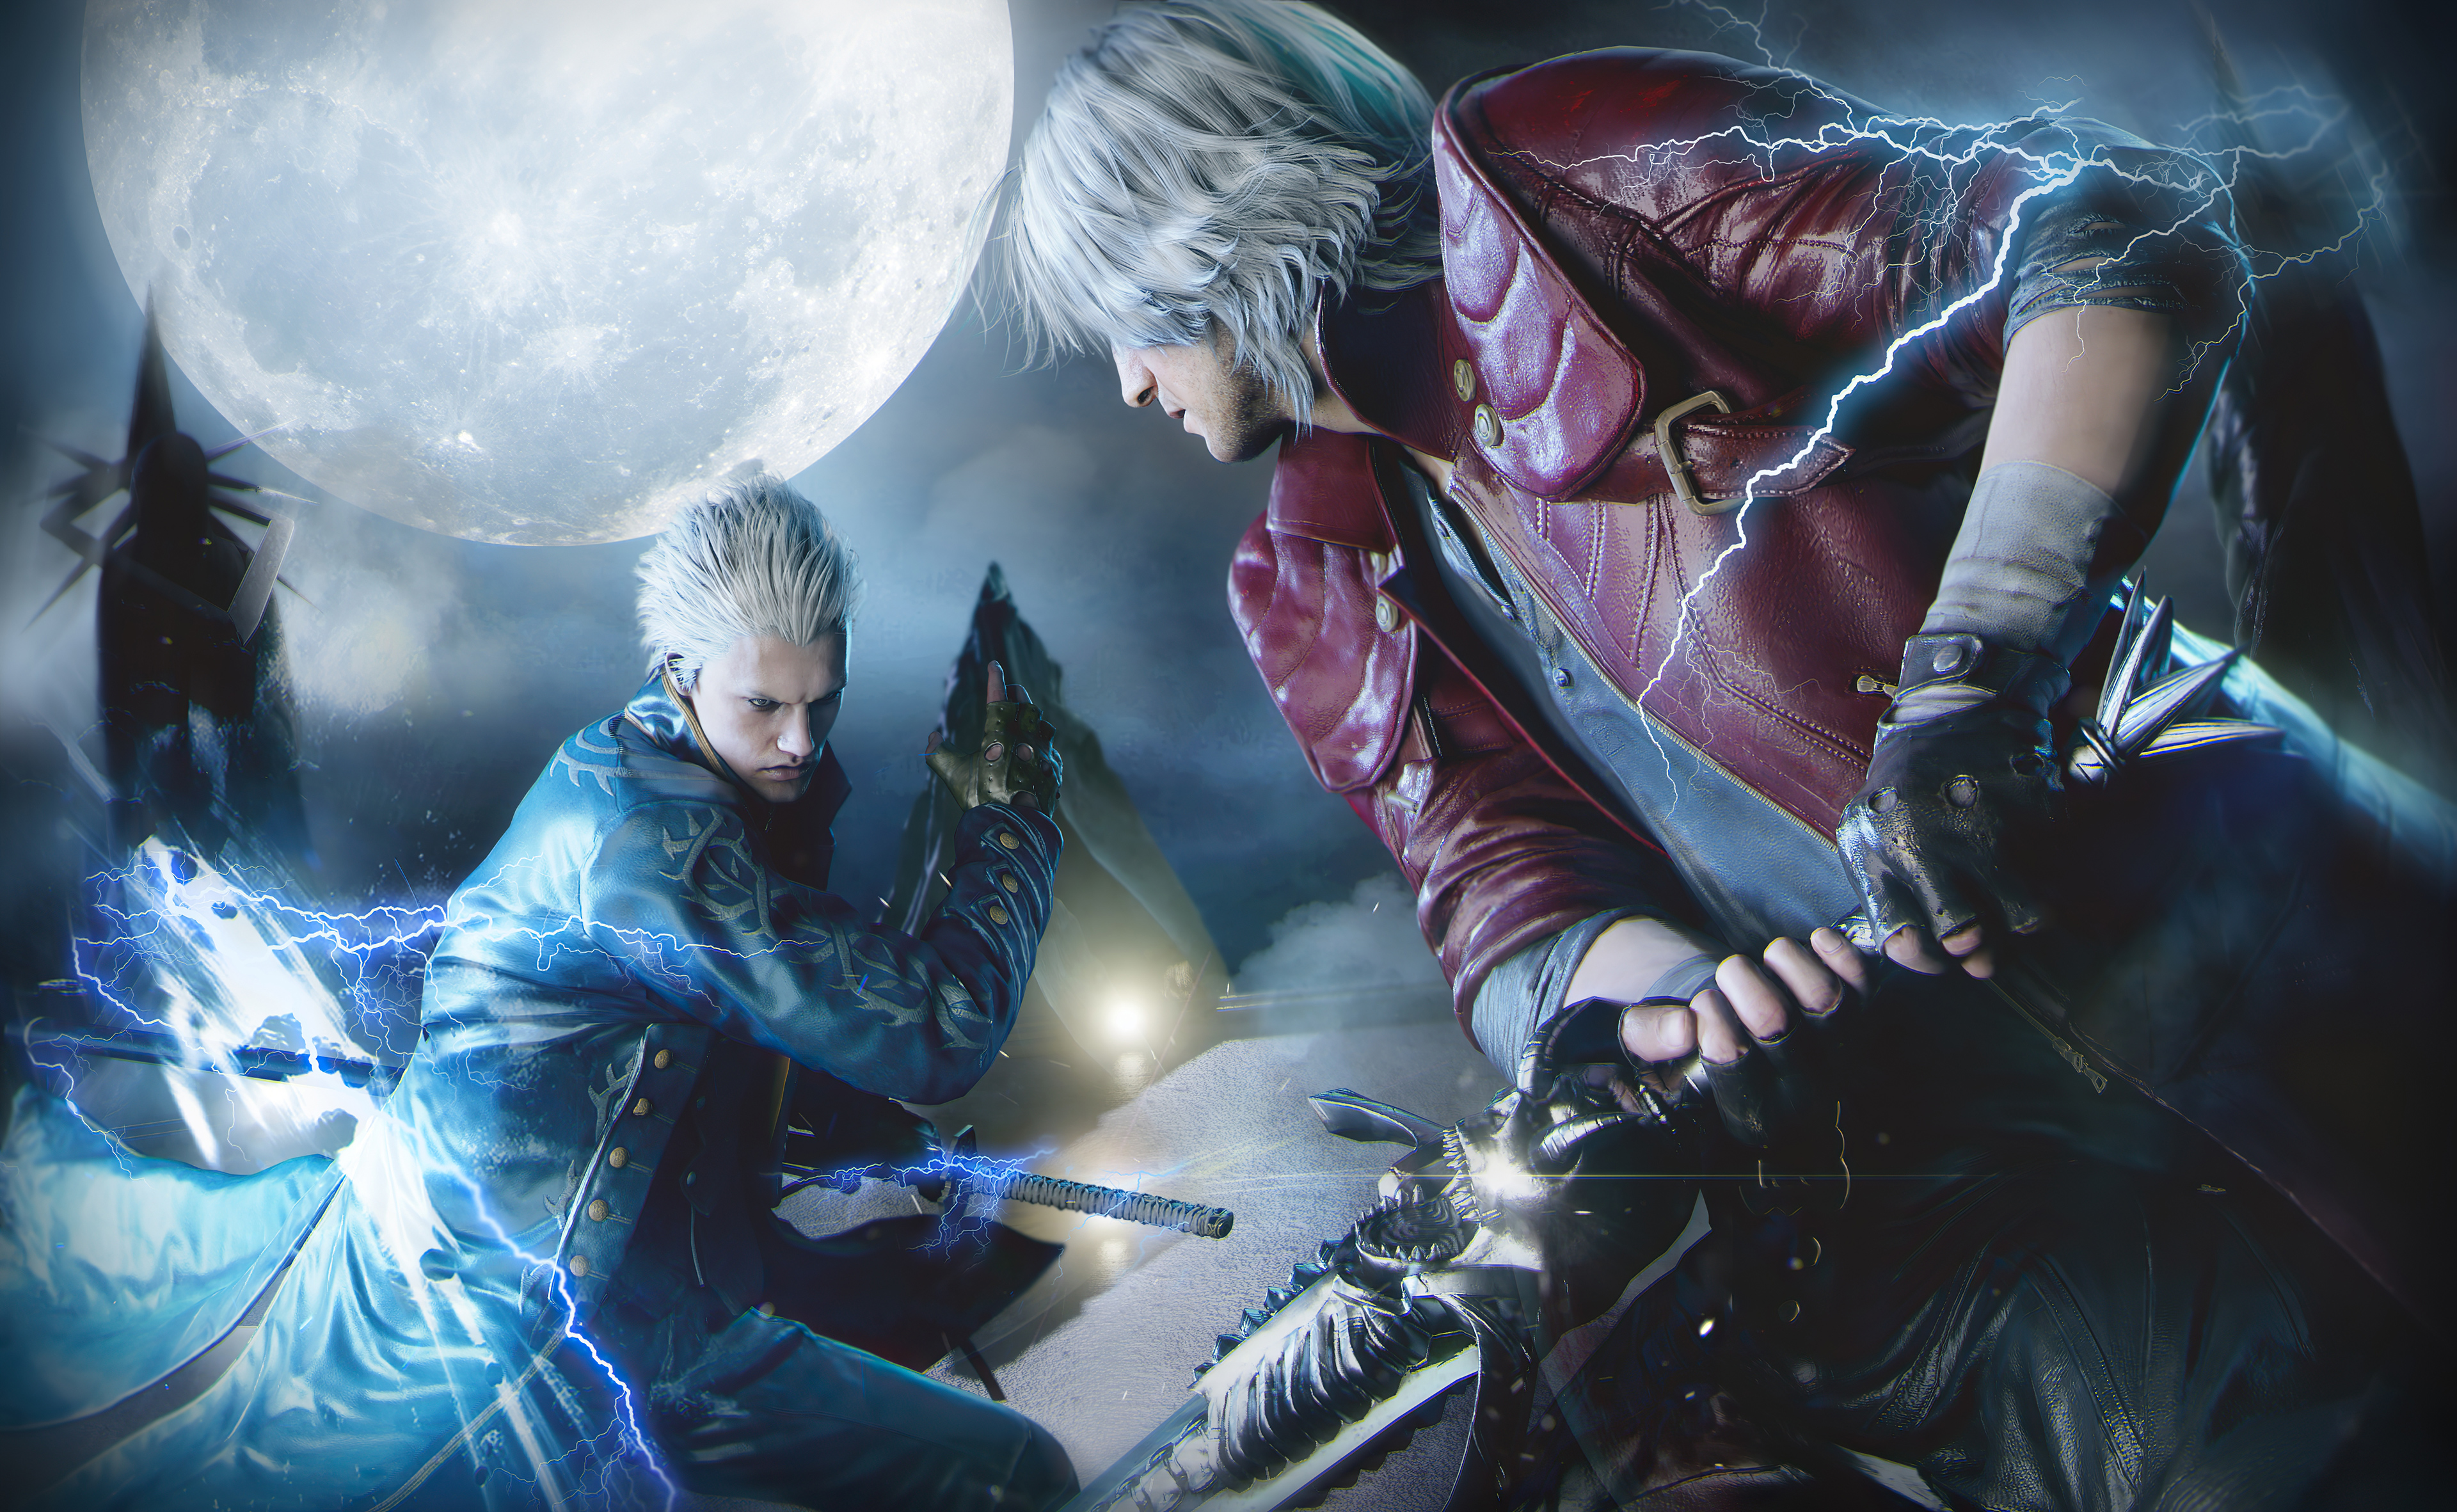 Devil May Cry Dante Devil May Cry Dante wallpapers, Devil May Cry Dante